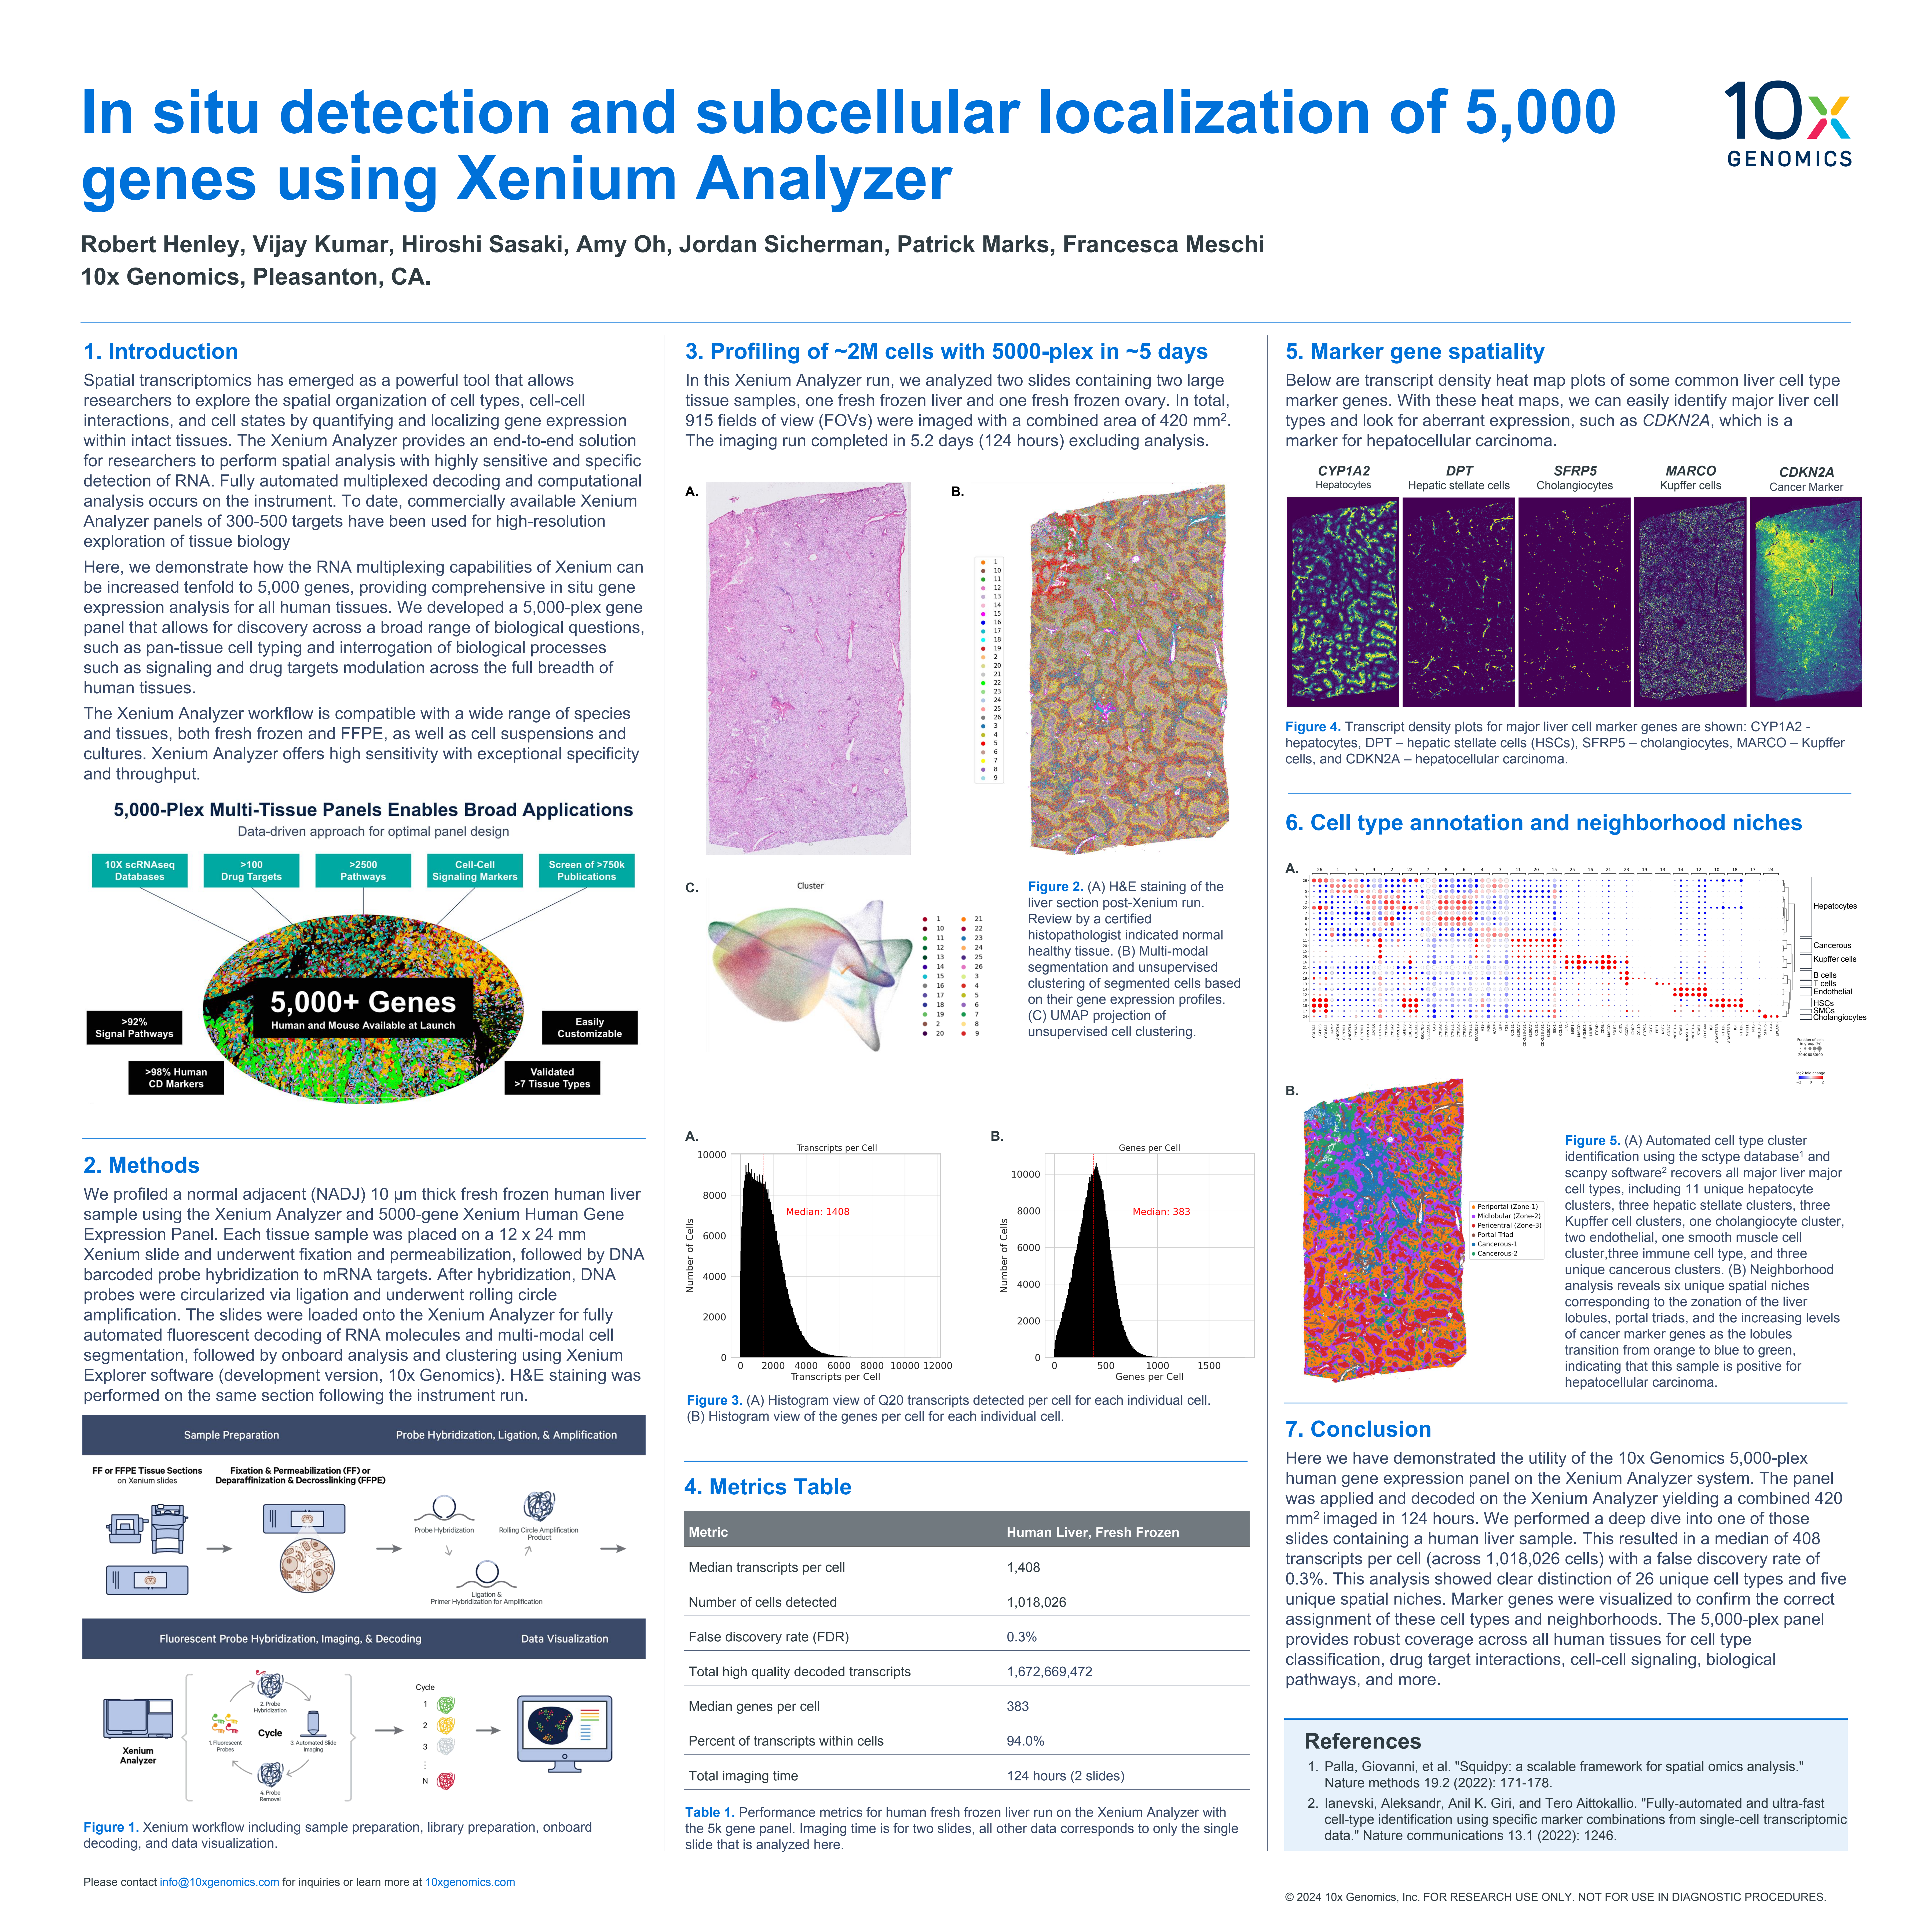 In situ detection and subcellular localization of 5,000 genes using Xenium Analyzer